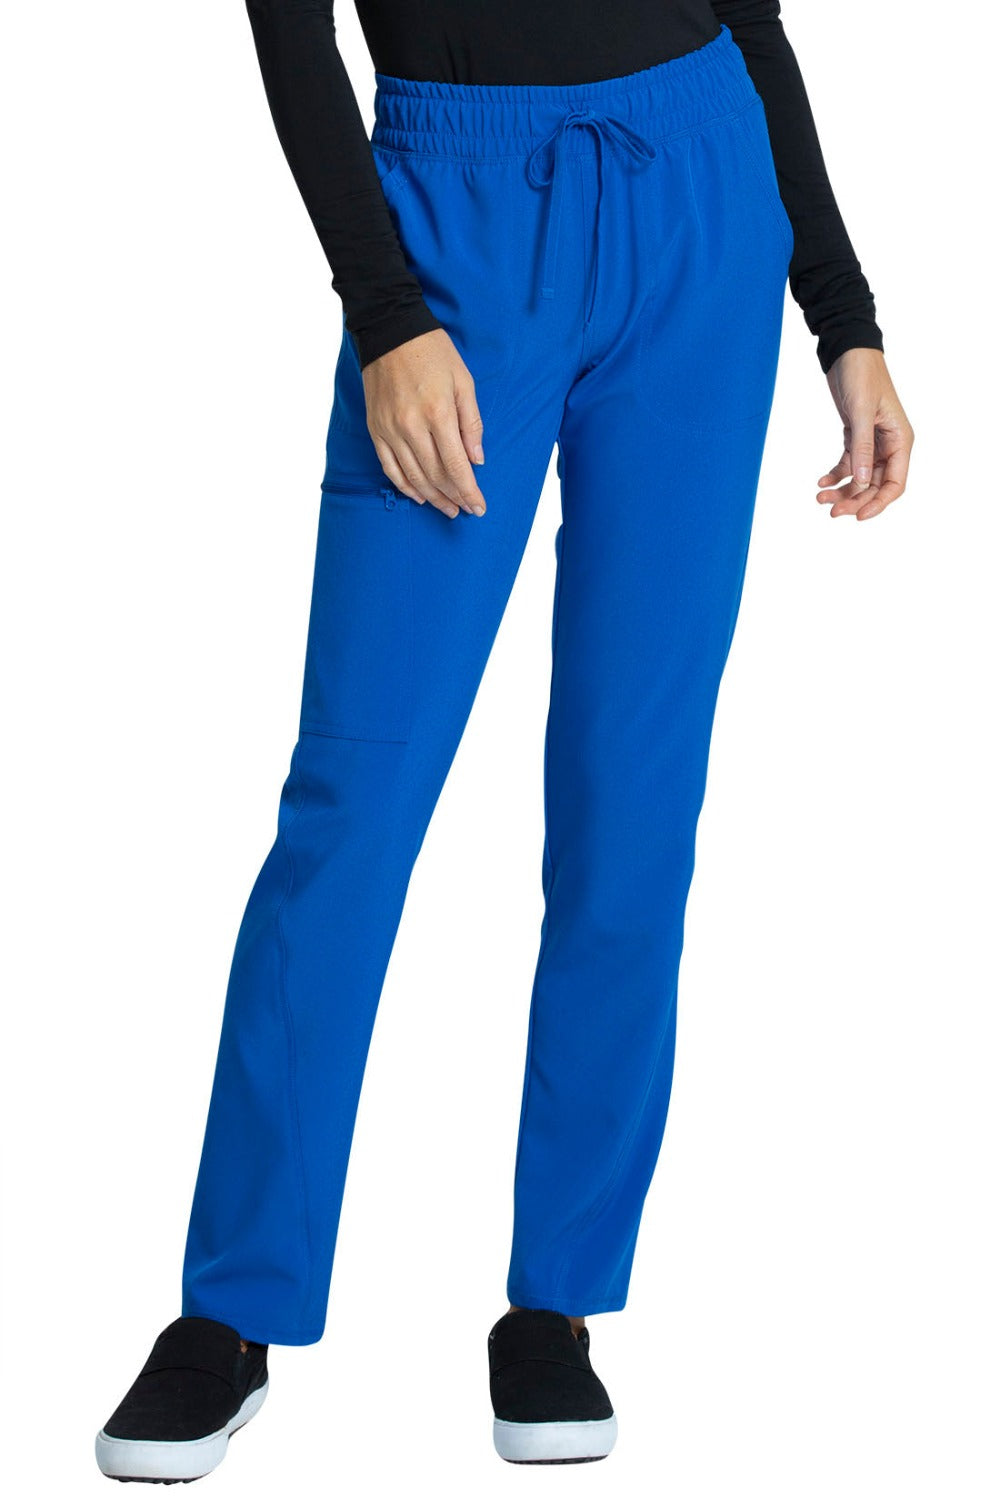 Cherokee Allura Scrub Pant Mid Rise Tapered Leg Drawstring in Royal at Parker's Clothing and Shoes.